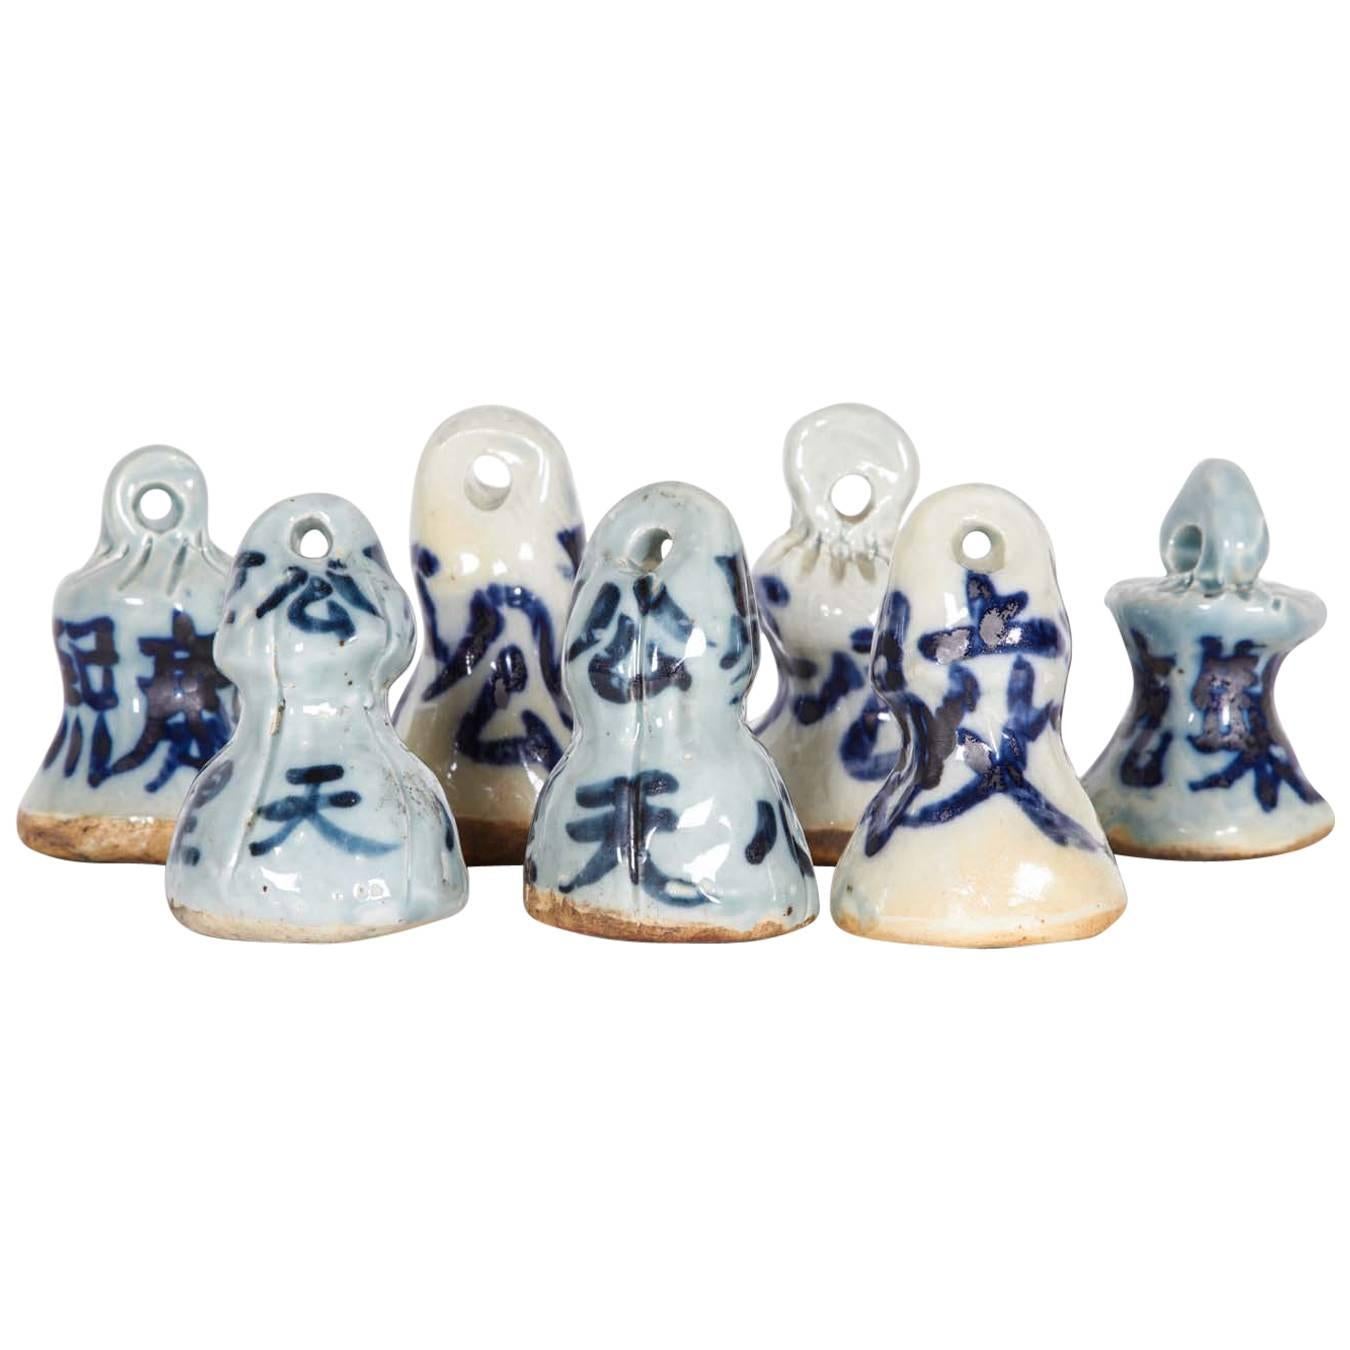 Early 20th Century Chinese Porcelain Weight Measures